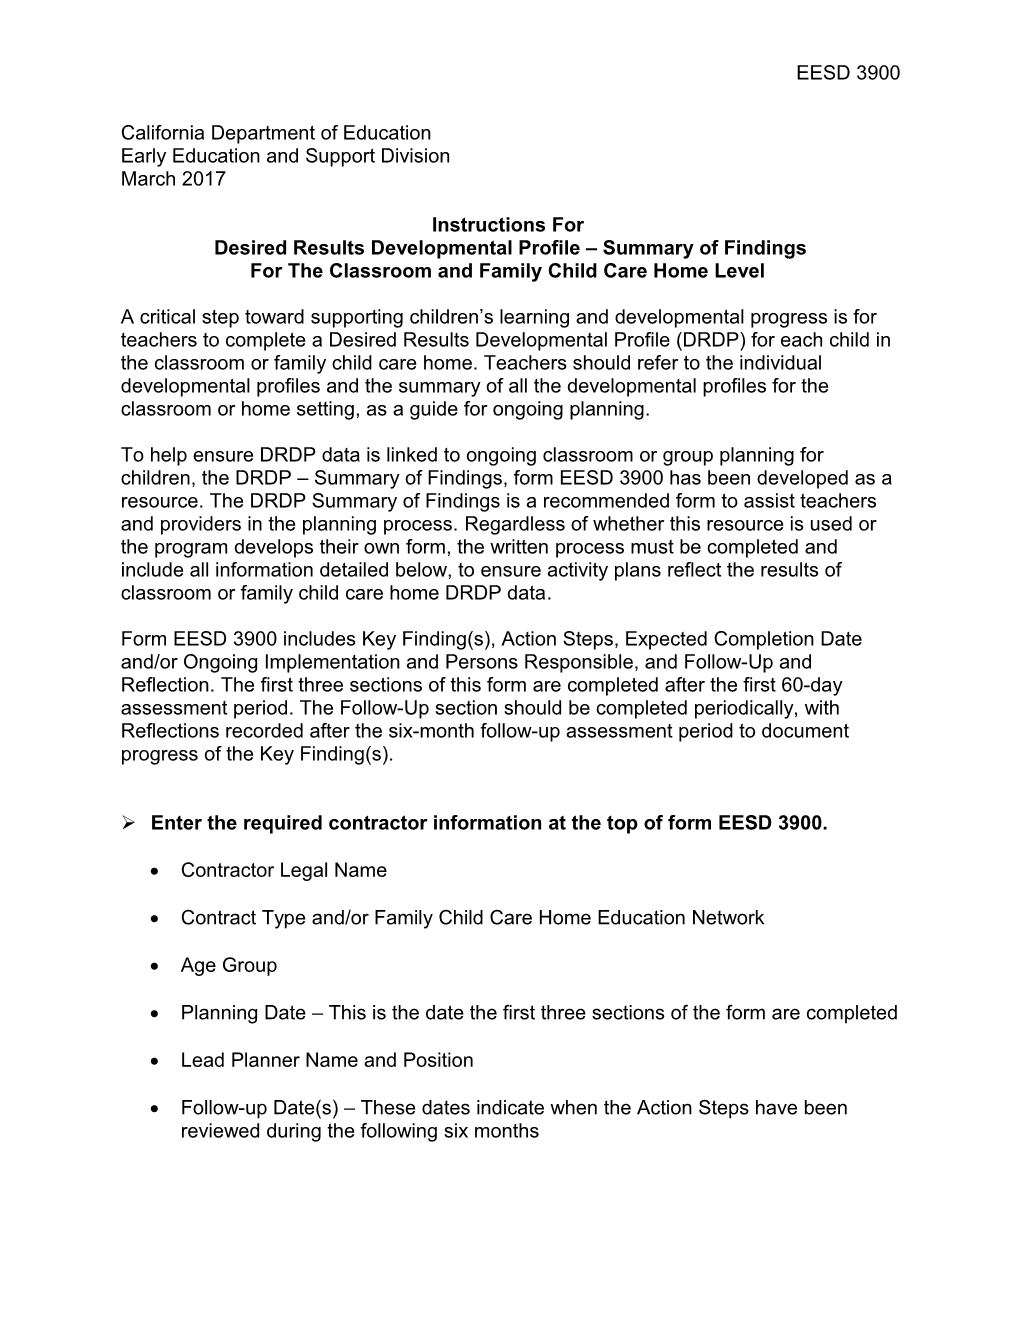 Form EESD 3900 with Instr - Child Development (CA Dept of Education)